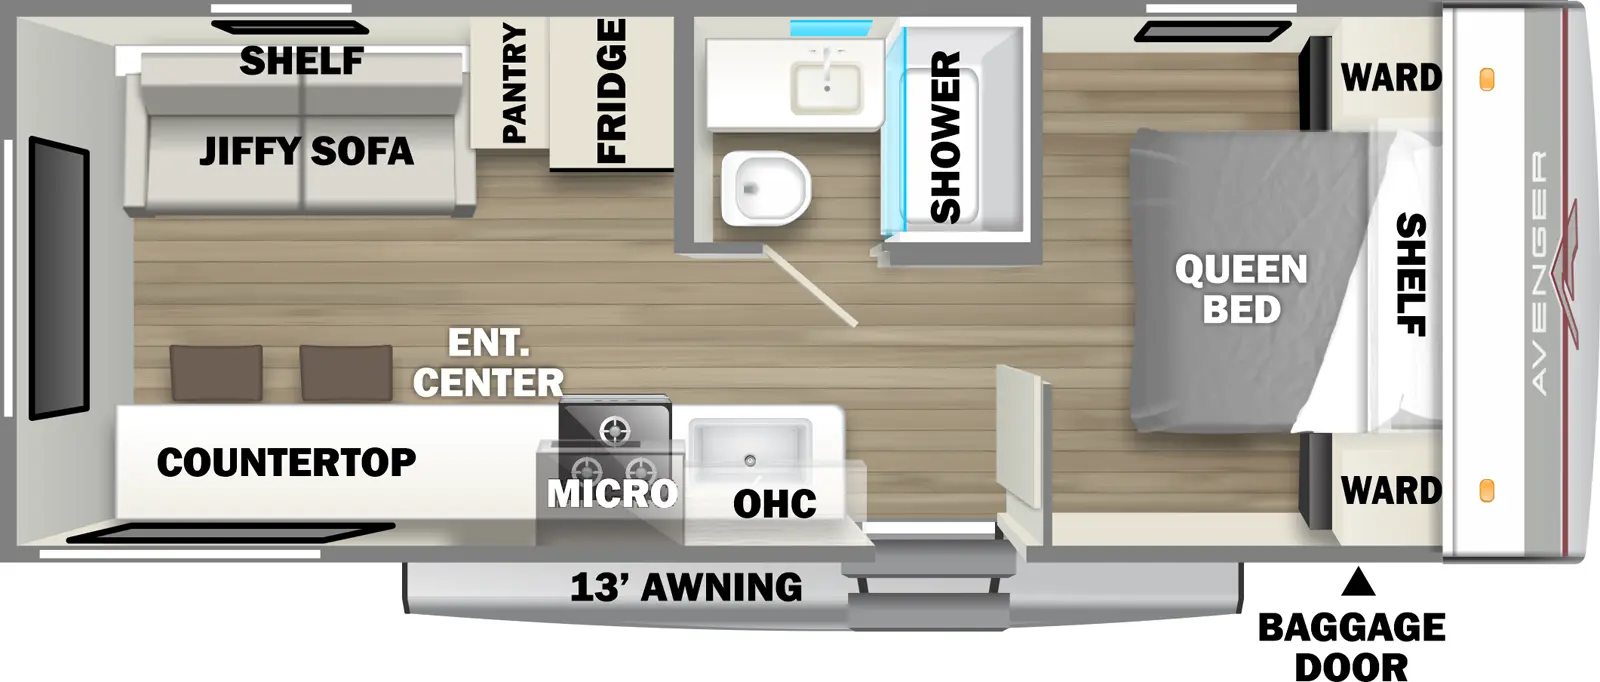 The 22MKLE has zero slideouts and one entry. Exterior features a 13 foot awning and baggage door. Interior layout front to back: foot facing queen bed with overhead shelf and wardrobes on each side; off-door side full bathroom; door side entry, kitchen counter with sink, overhead cabinet, microwave, cooktop, and countertop that goes to the rear with seating; off-door side refrigerator, pantry, and rear jiffy sofa with shelf above.